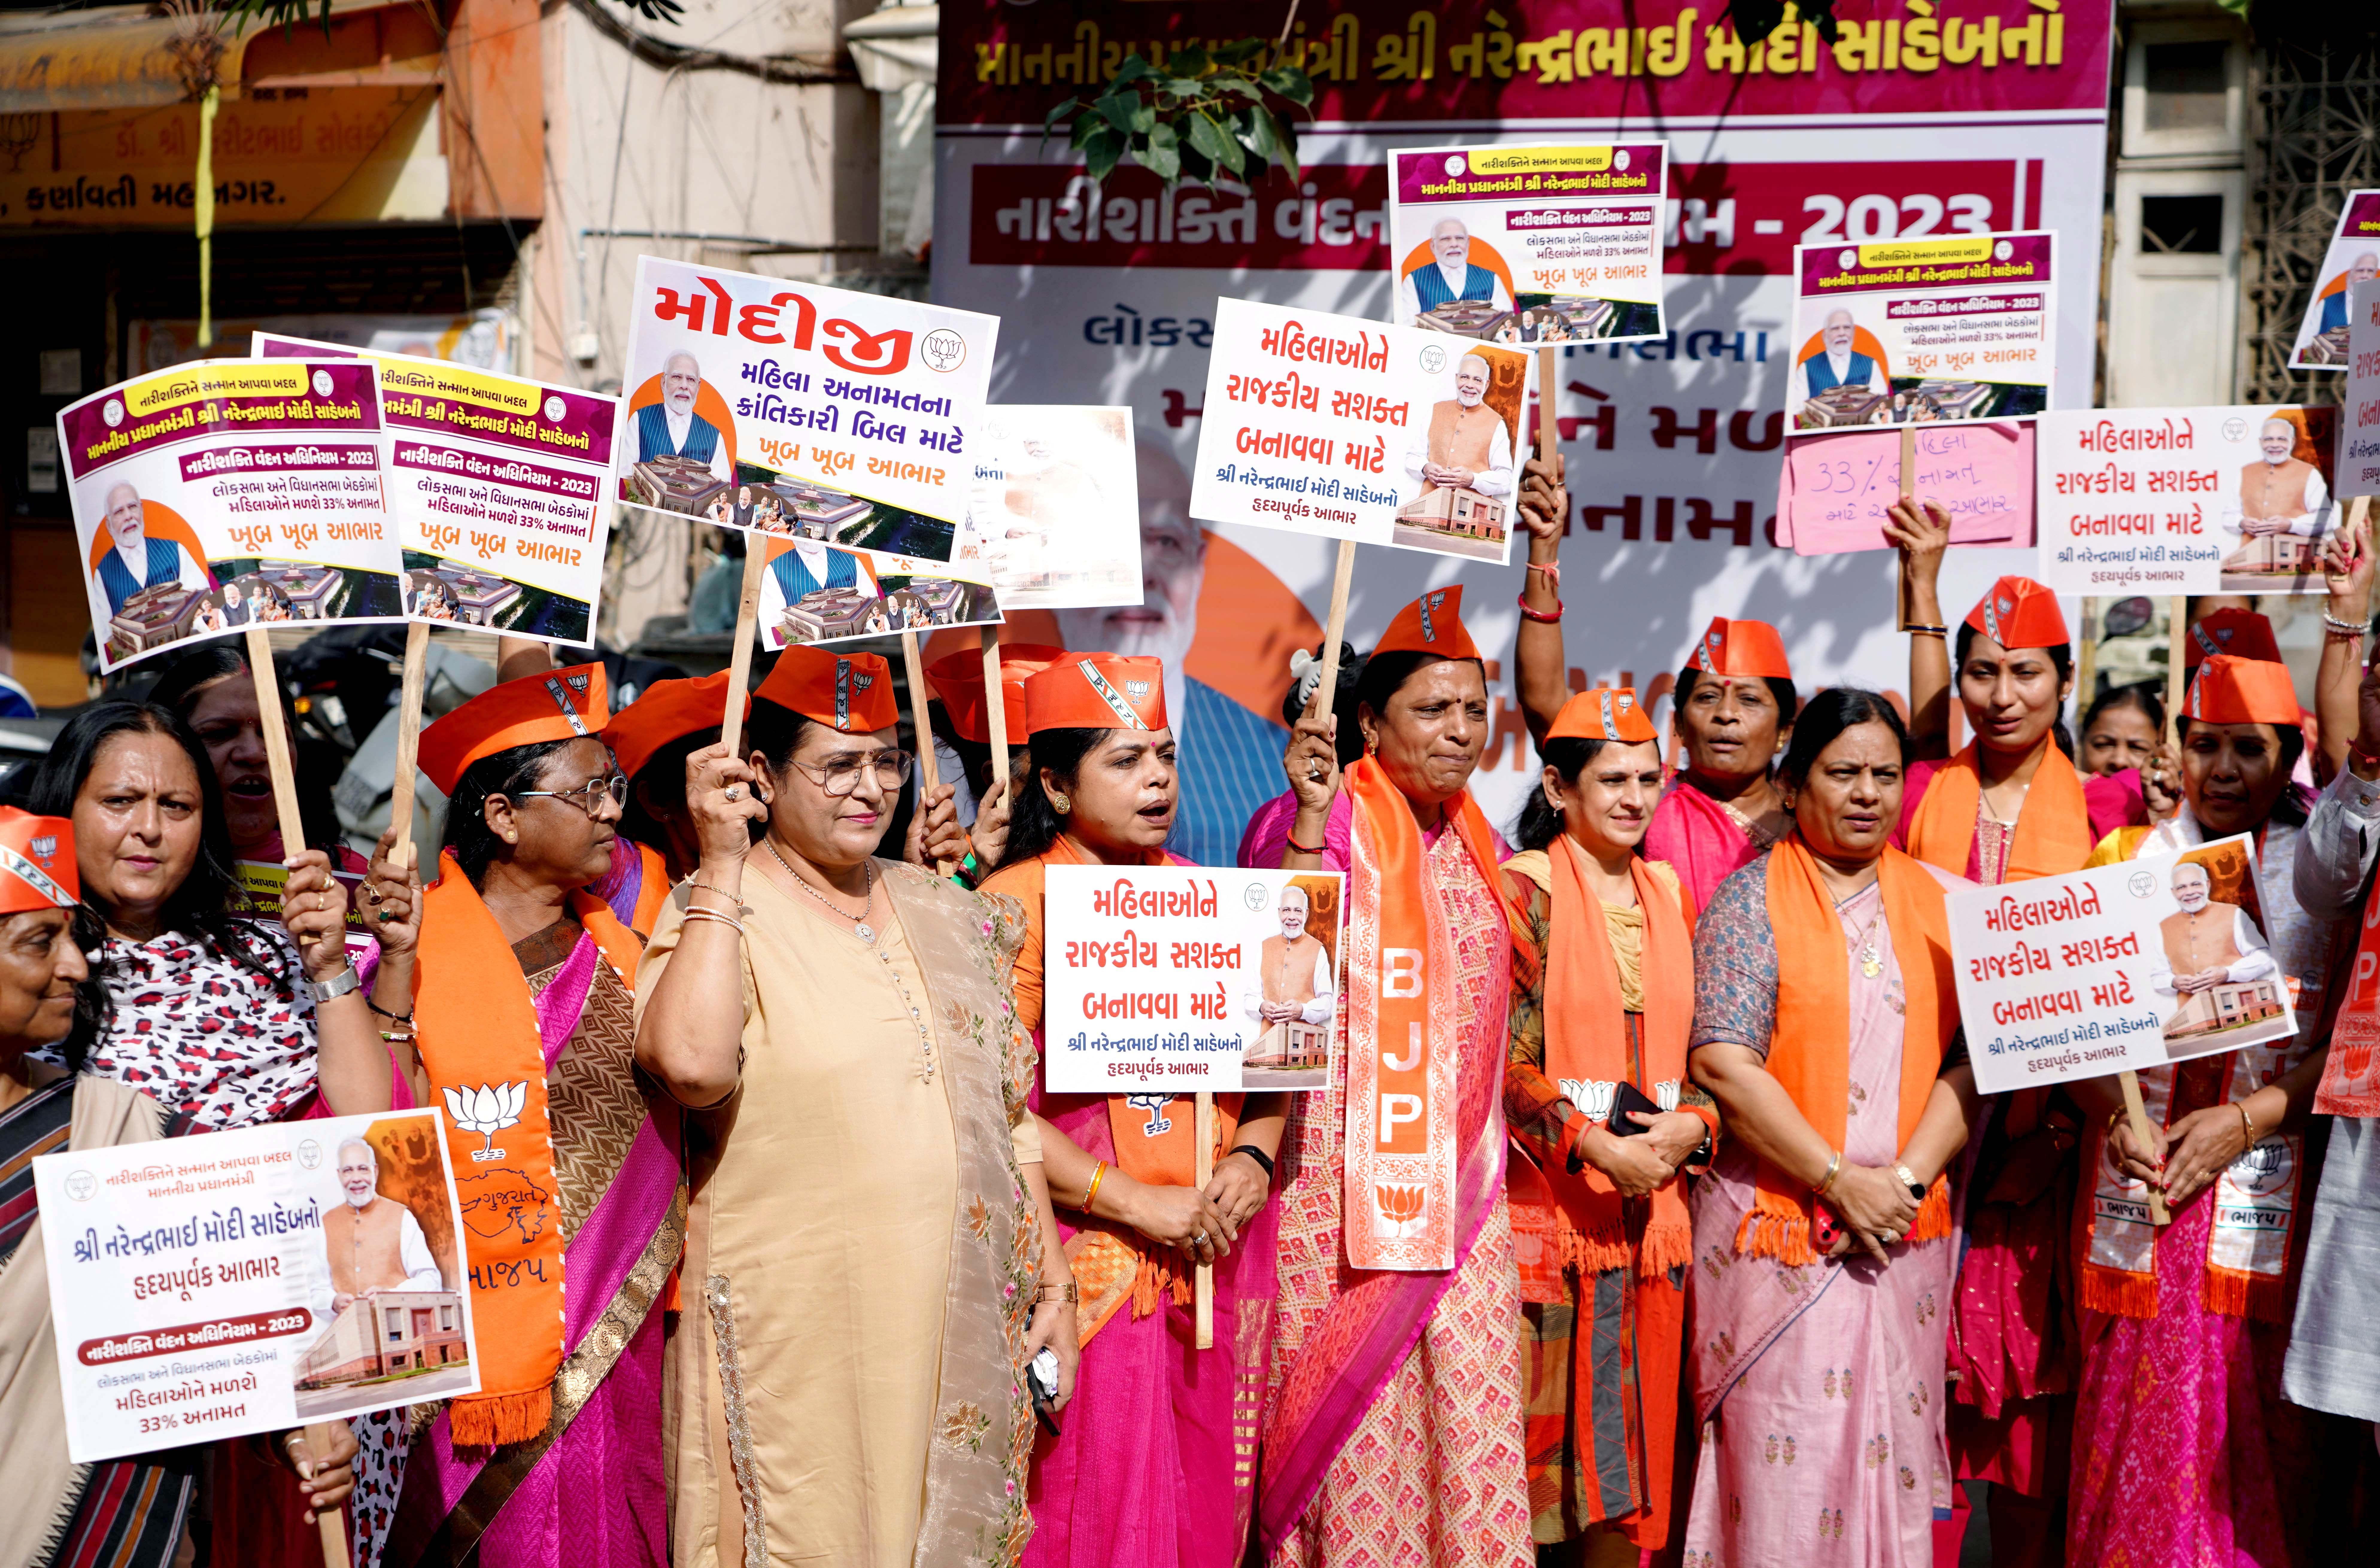 BJP Mahila Morcha workers celebrate the introduction of Women's Reservation Bill in the Special Session of the Parliament in Ahmedabad on Thursday.